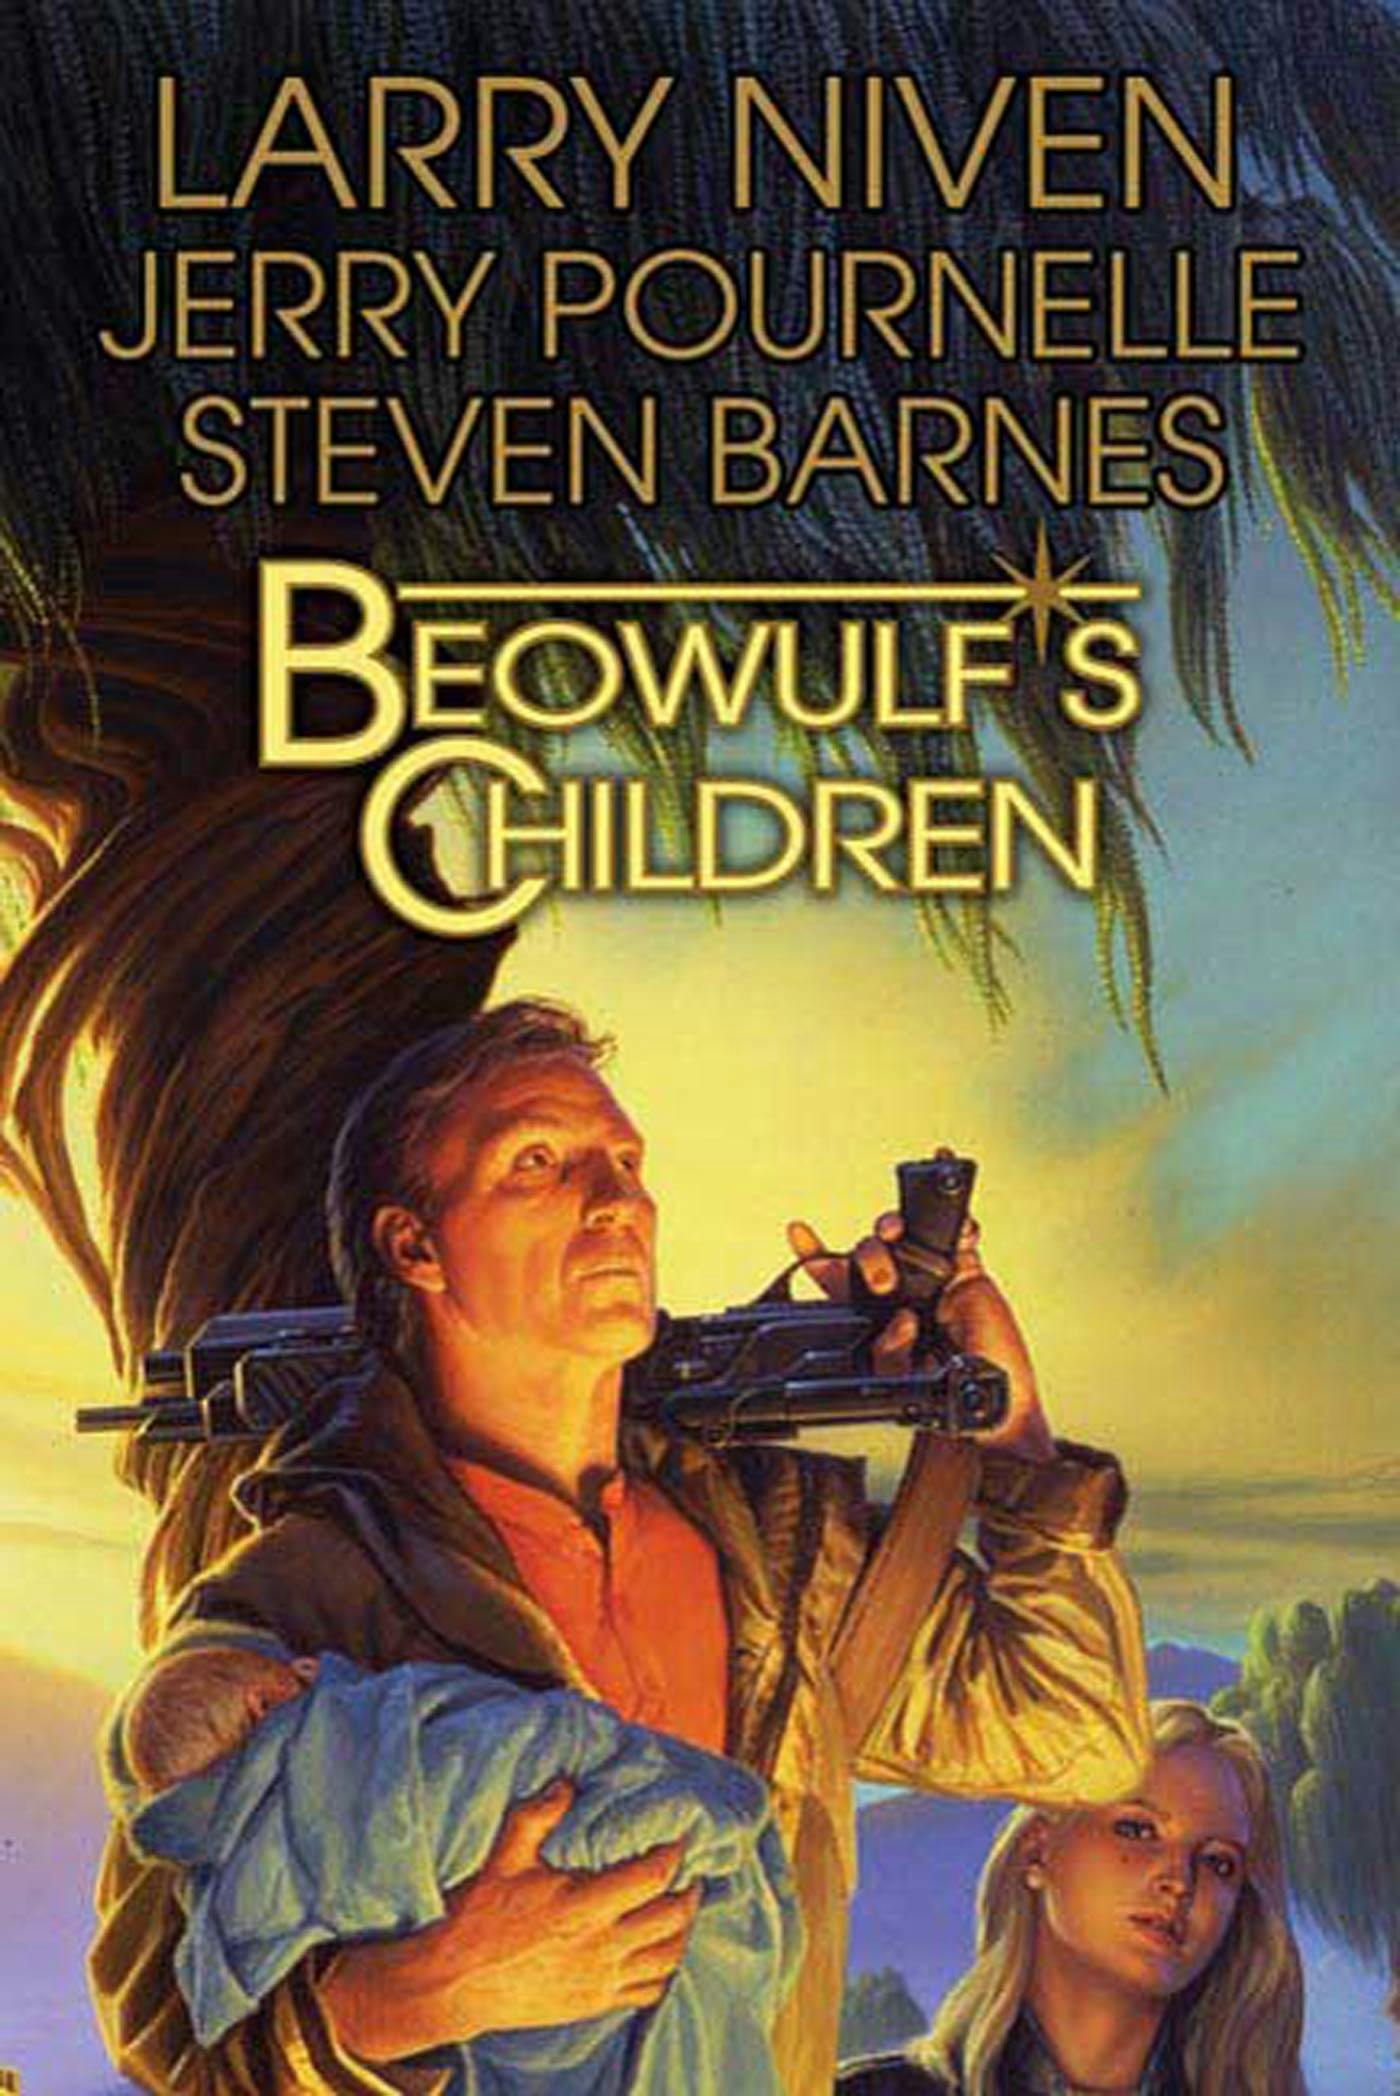 Cover for the book titled as: Beowulf's Children